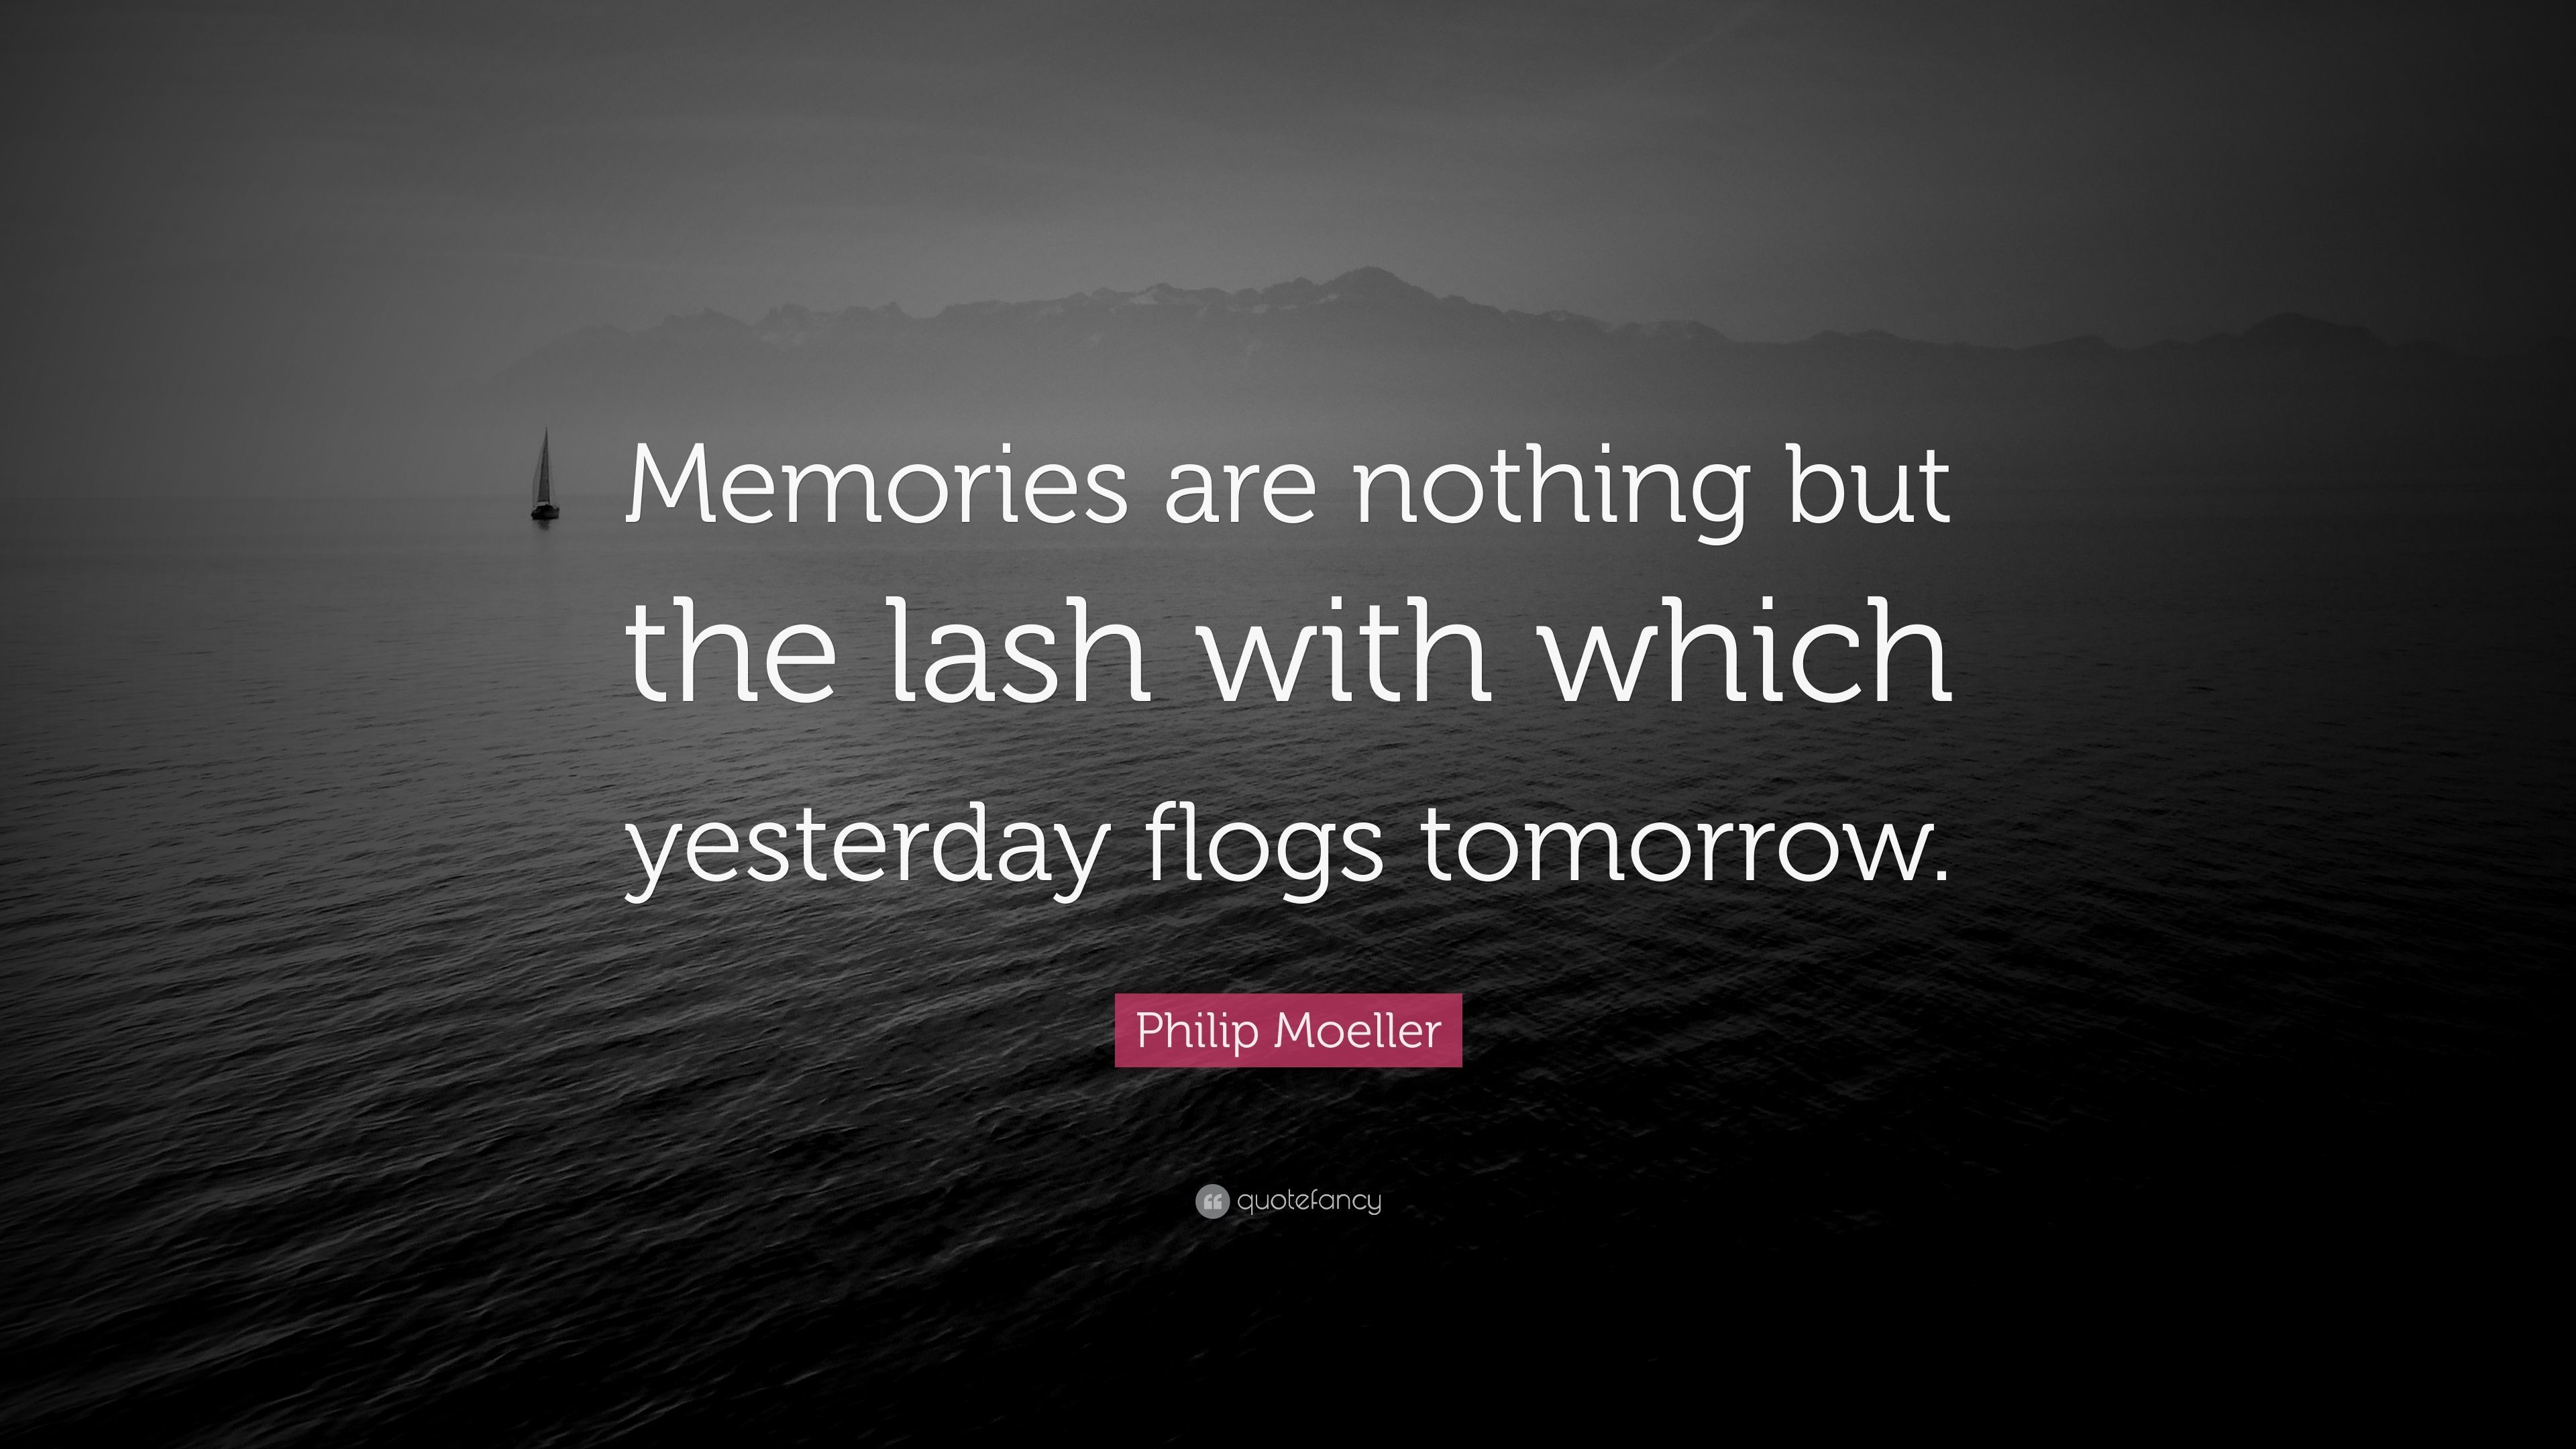 Philip Moeller Quote: “Memories are nothing but the lash with which yesterday flogs tomorrow.” (7 wallpaper)